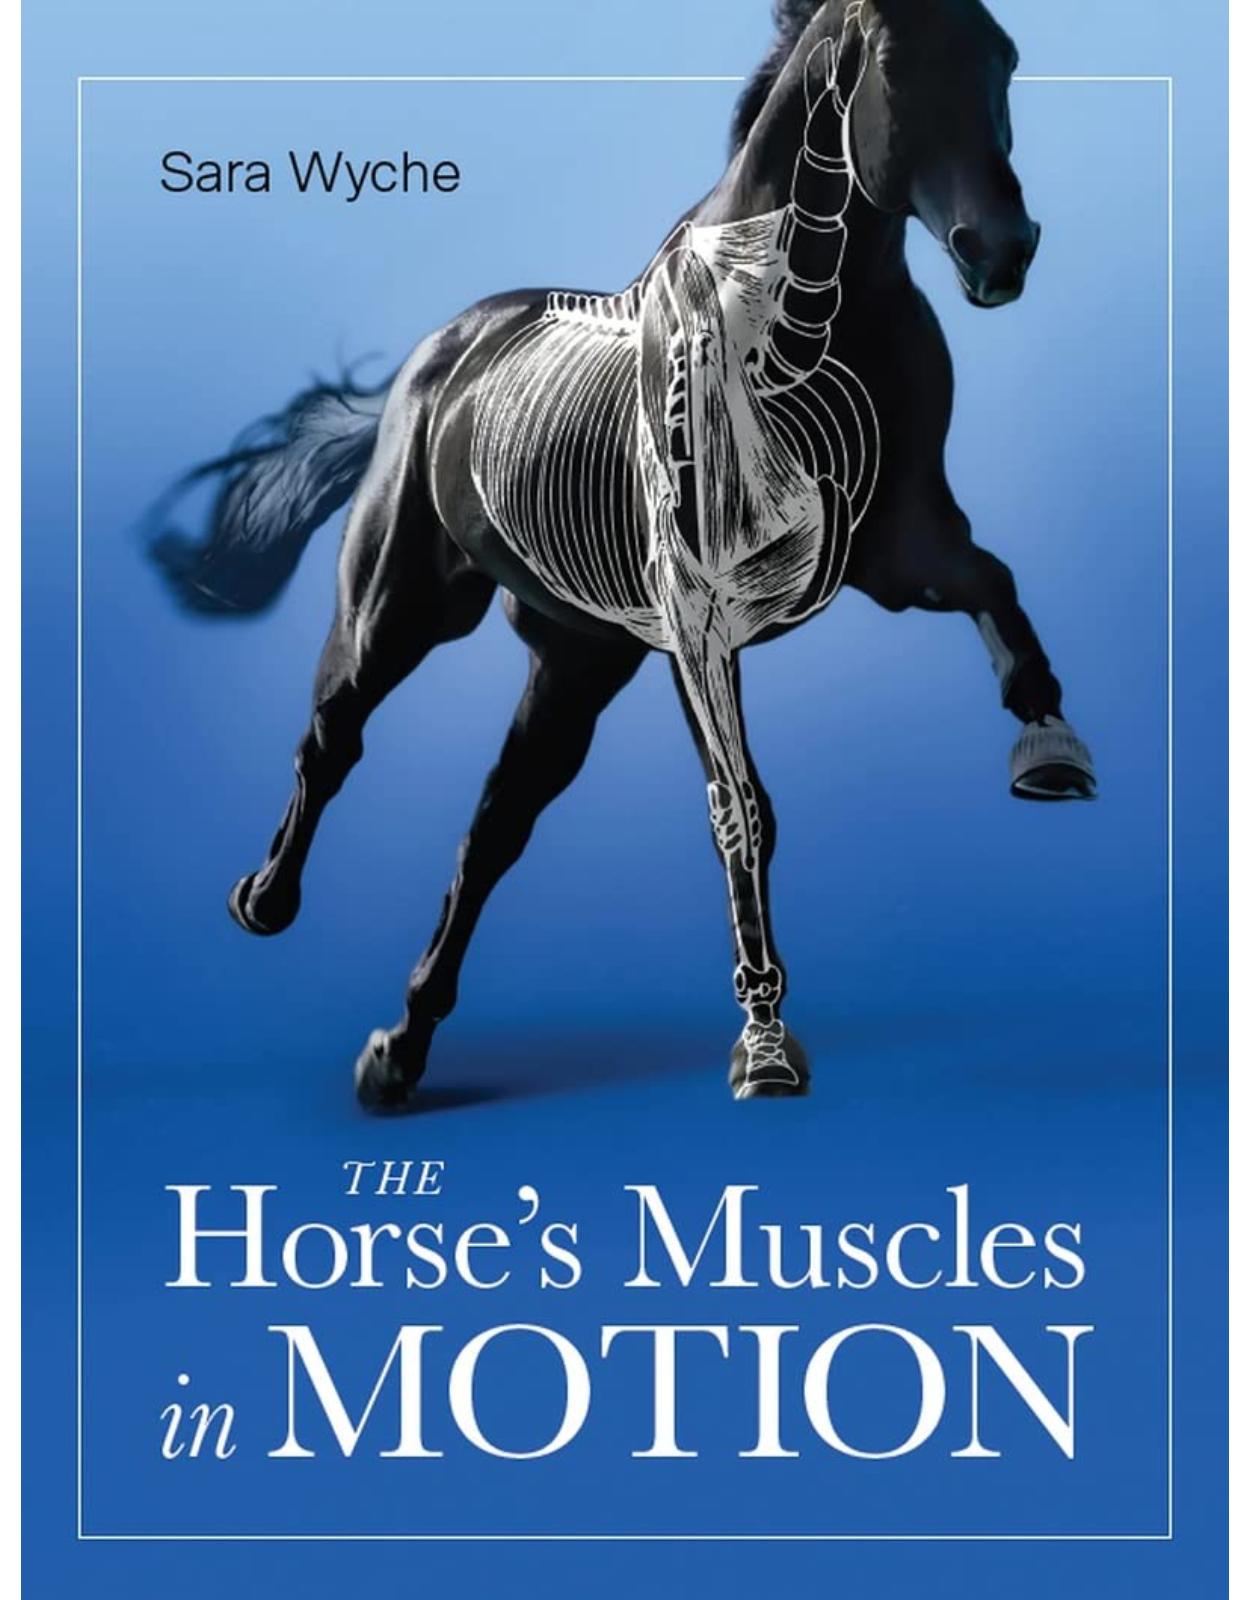 Horse's Muscles in Motion